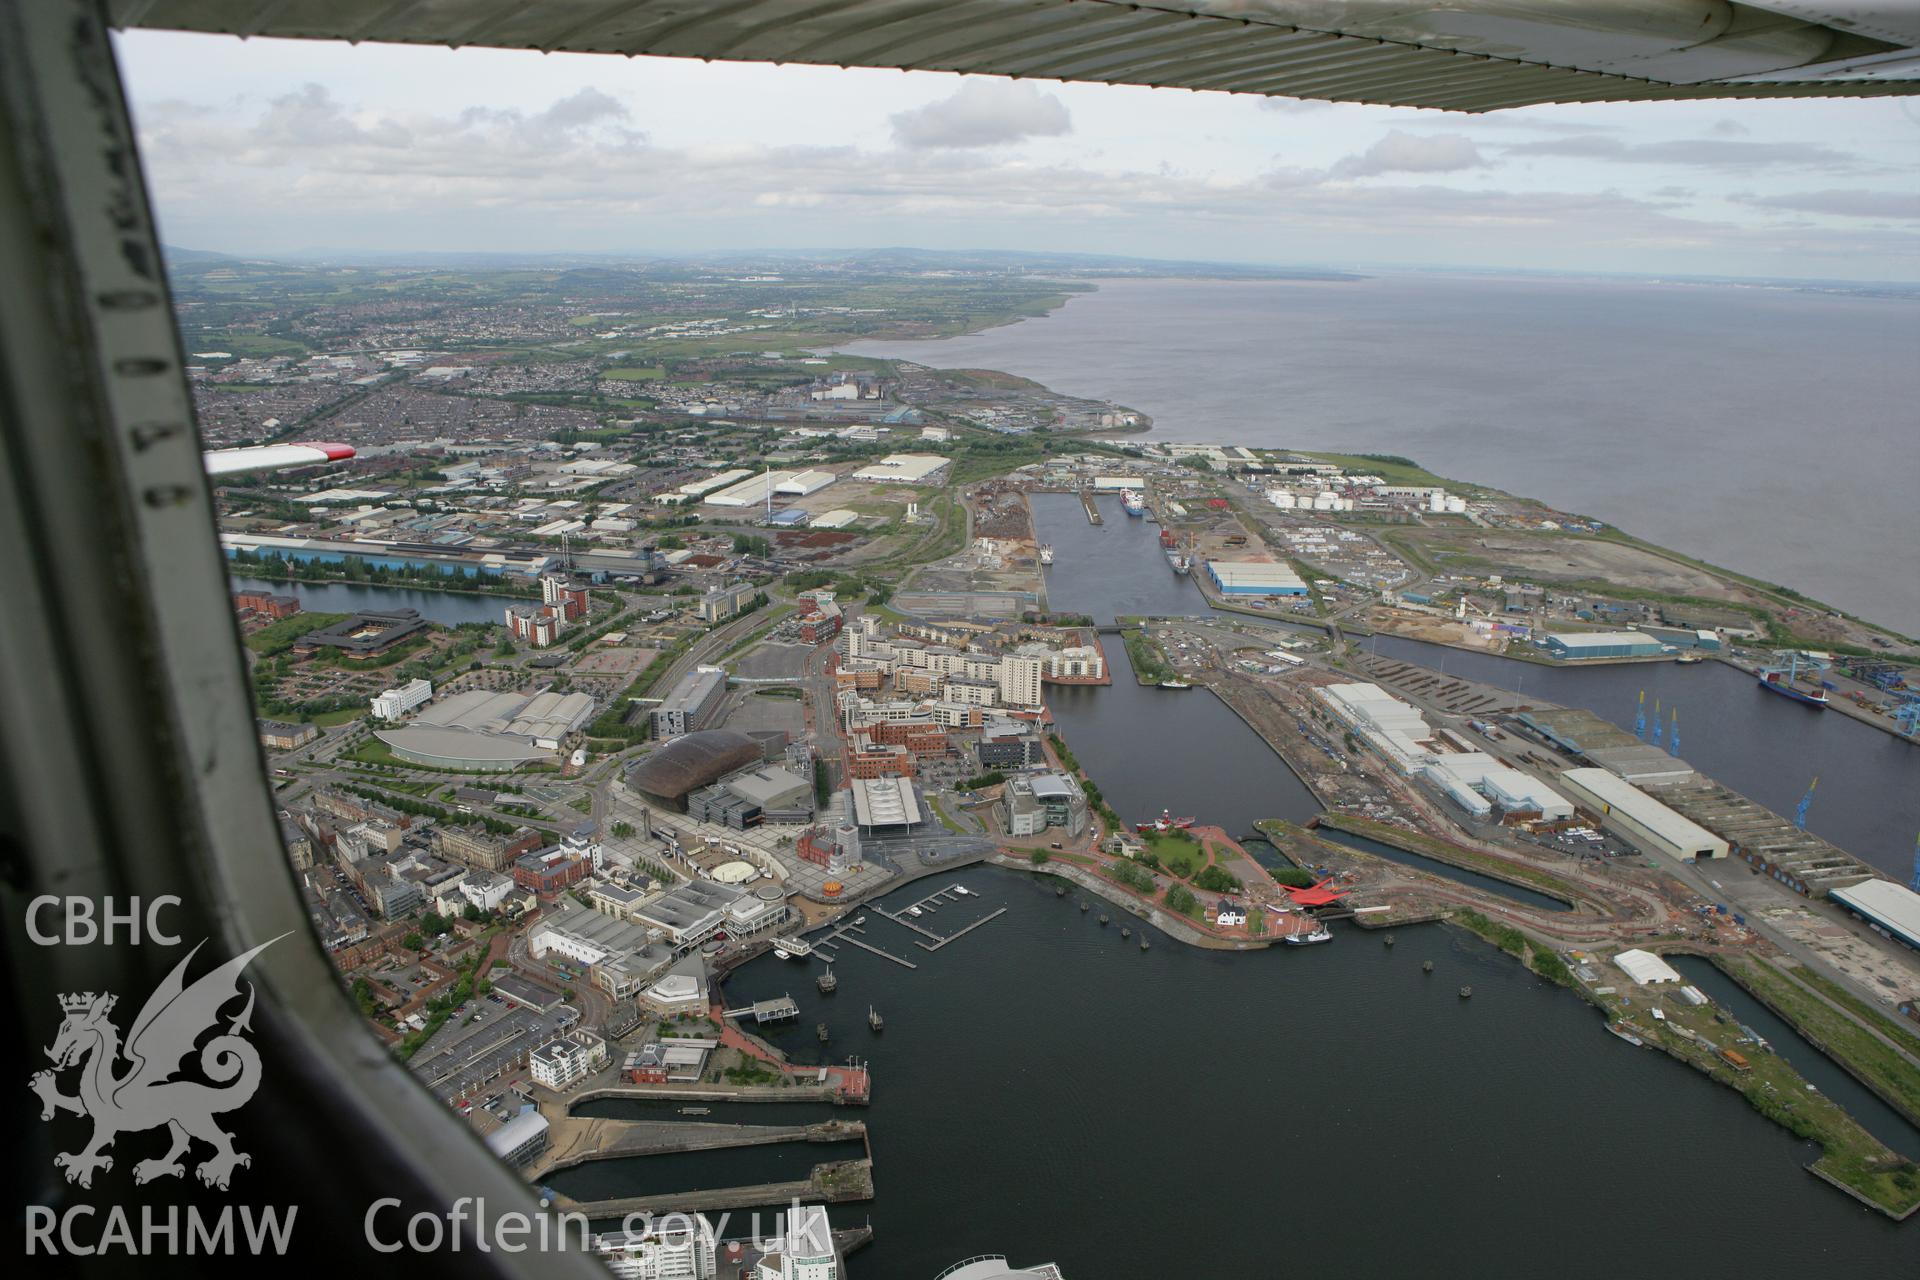 RCAHMW colour oblique photograph of Roath Basin, Cardiff Docks. Taken by Toby Driver on 13/06/2011.